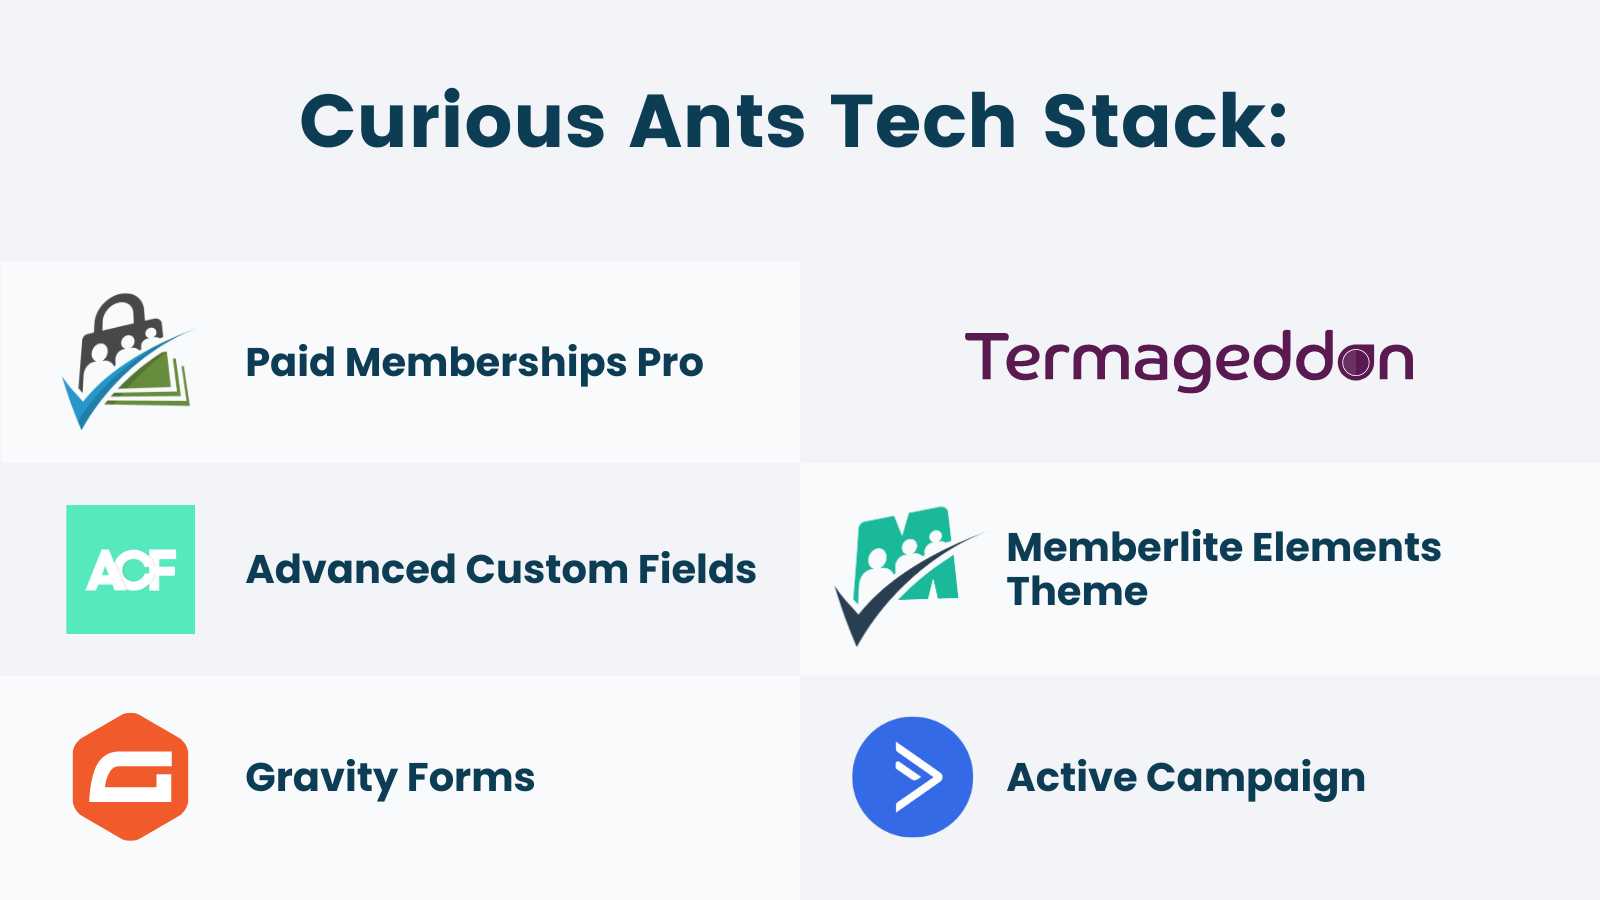 Info-graphic for Curious Ants Tech Stack